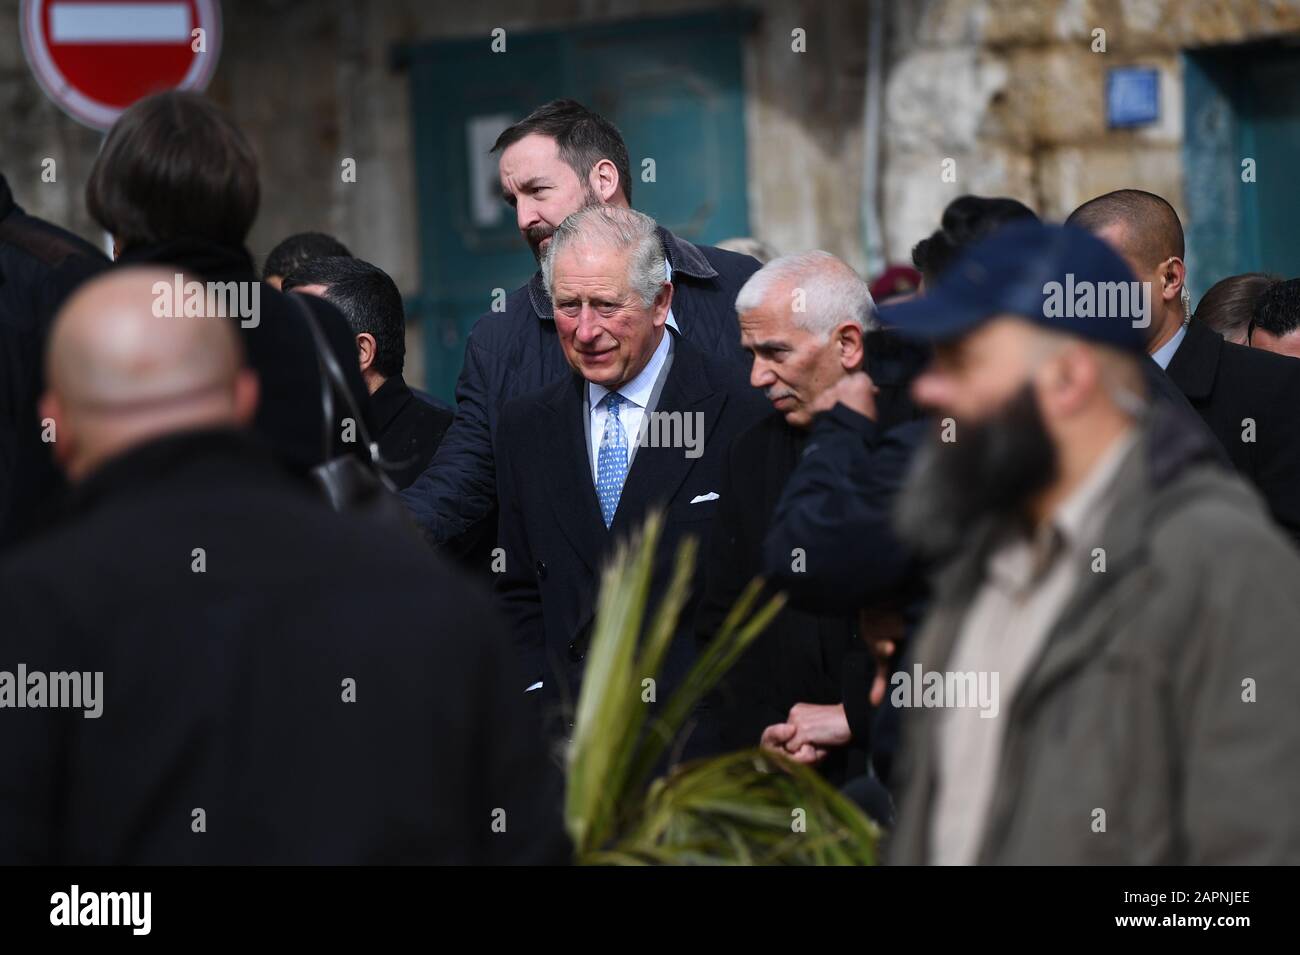 The Prince of Wales (centre) during a visit to the Church of the Nativity in Bethlehem on the second day of his visit to Israel and the occupied Palestinian territories. Stock Photo